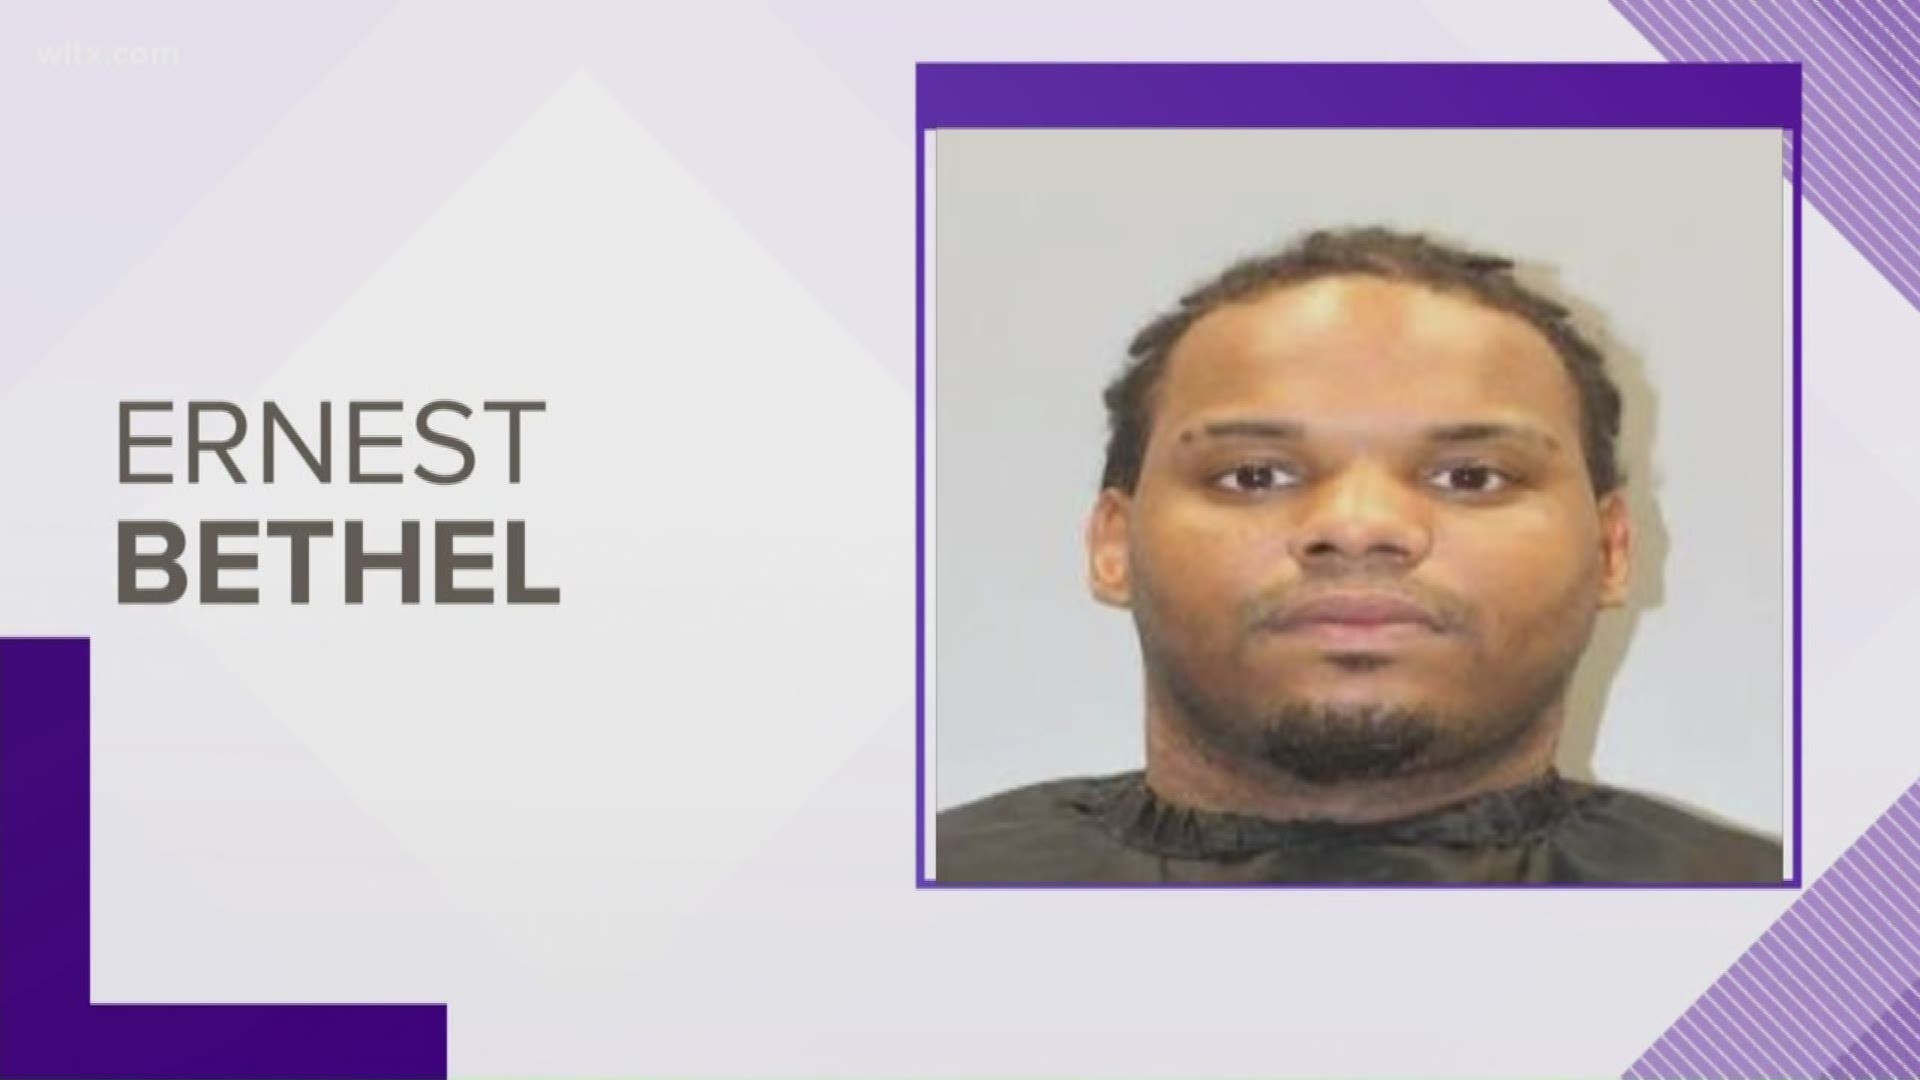 According to the Richland County Sheriff's Office, Ernest Condre Bethel has been arrested.